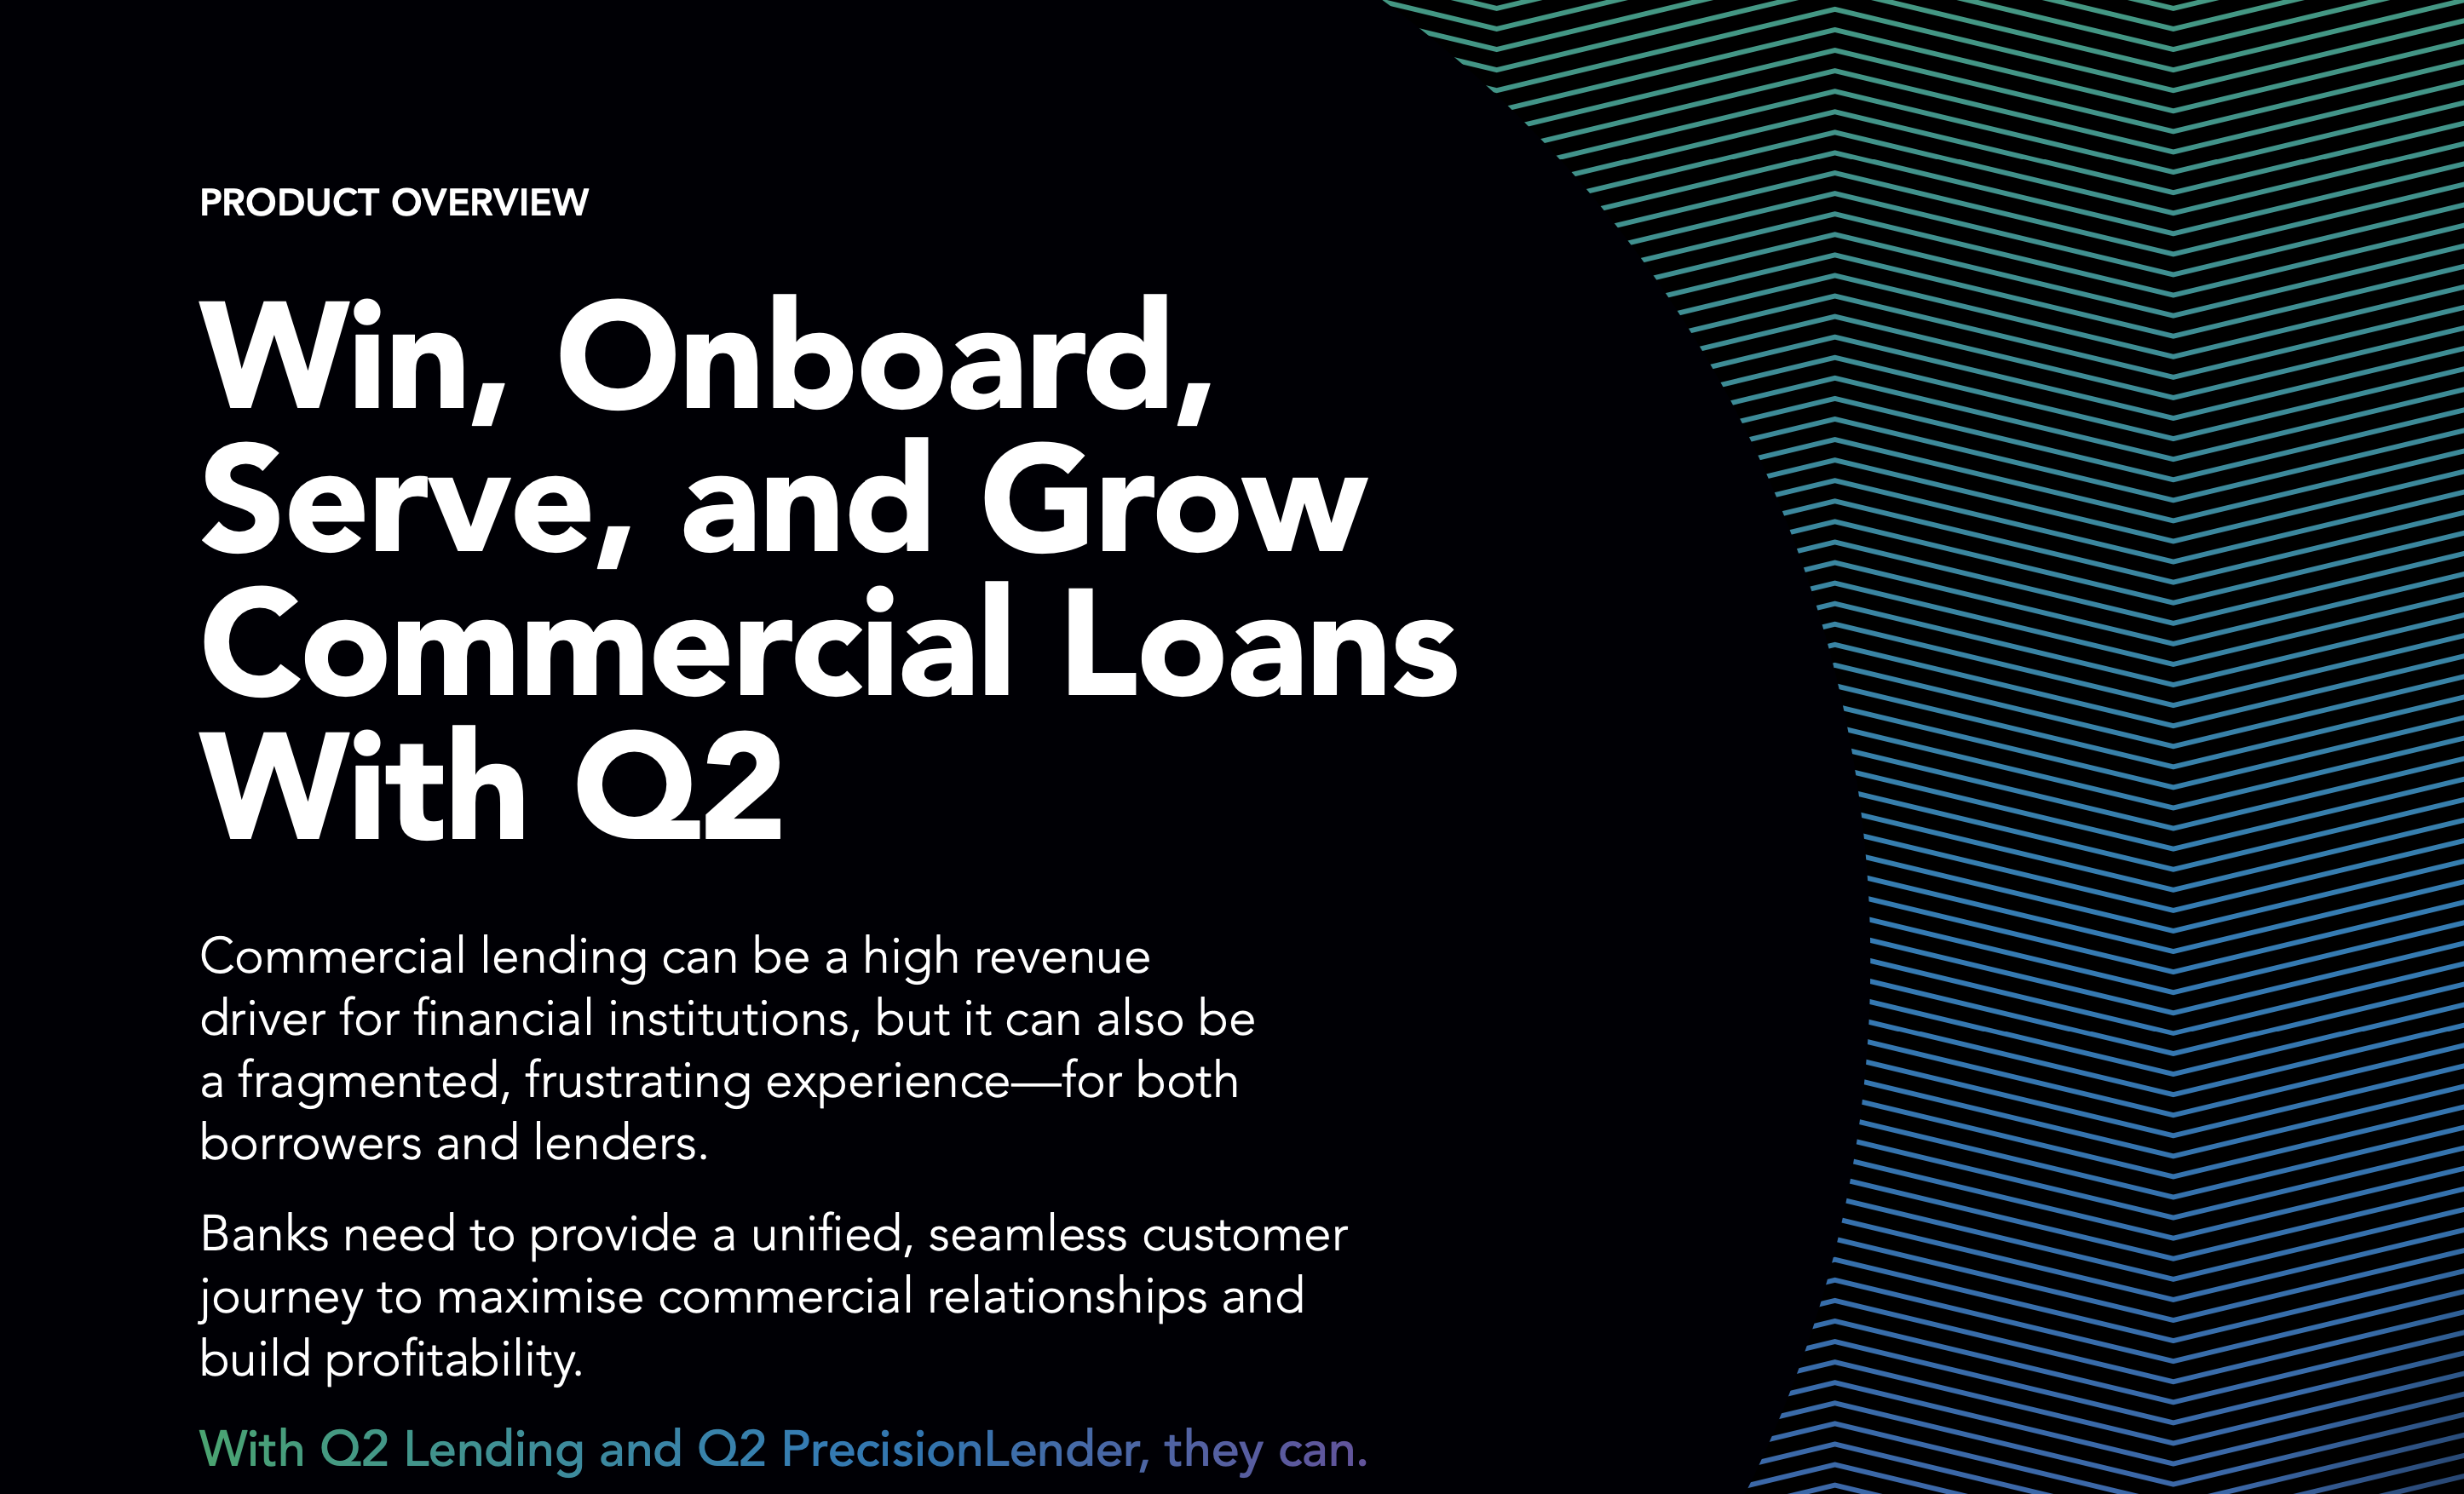 Win, onboard, serve, and grow commercial loans with Q2